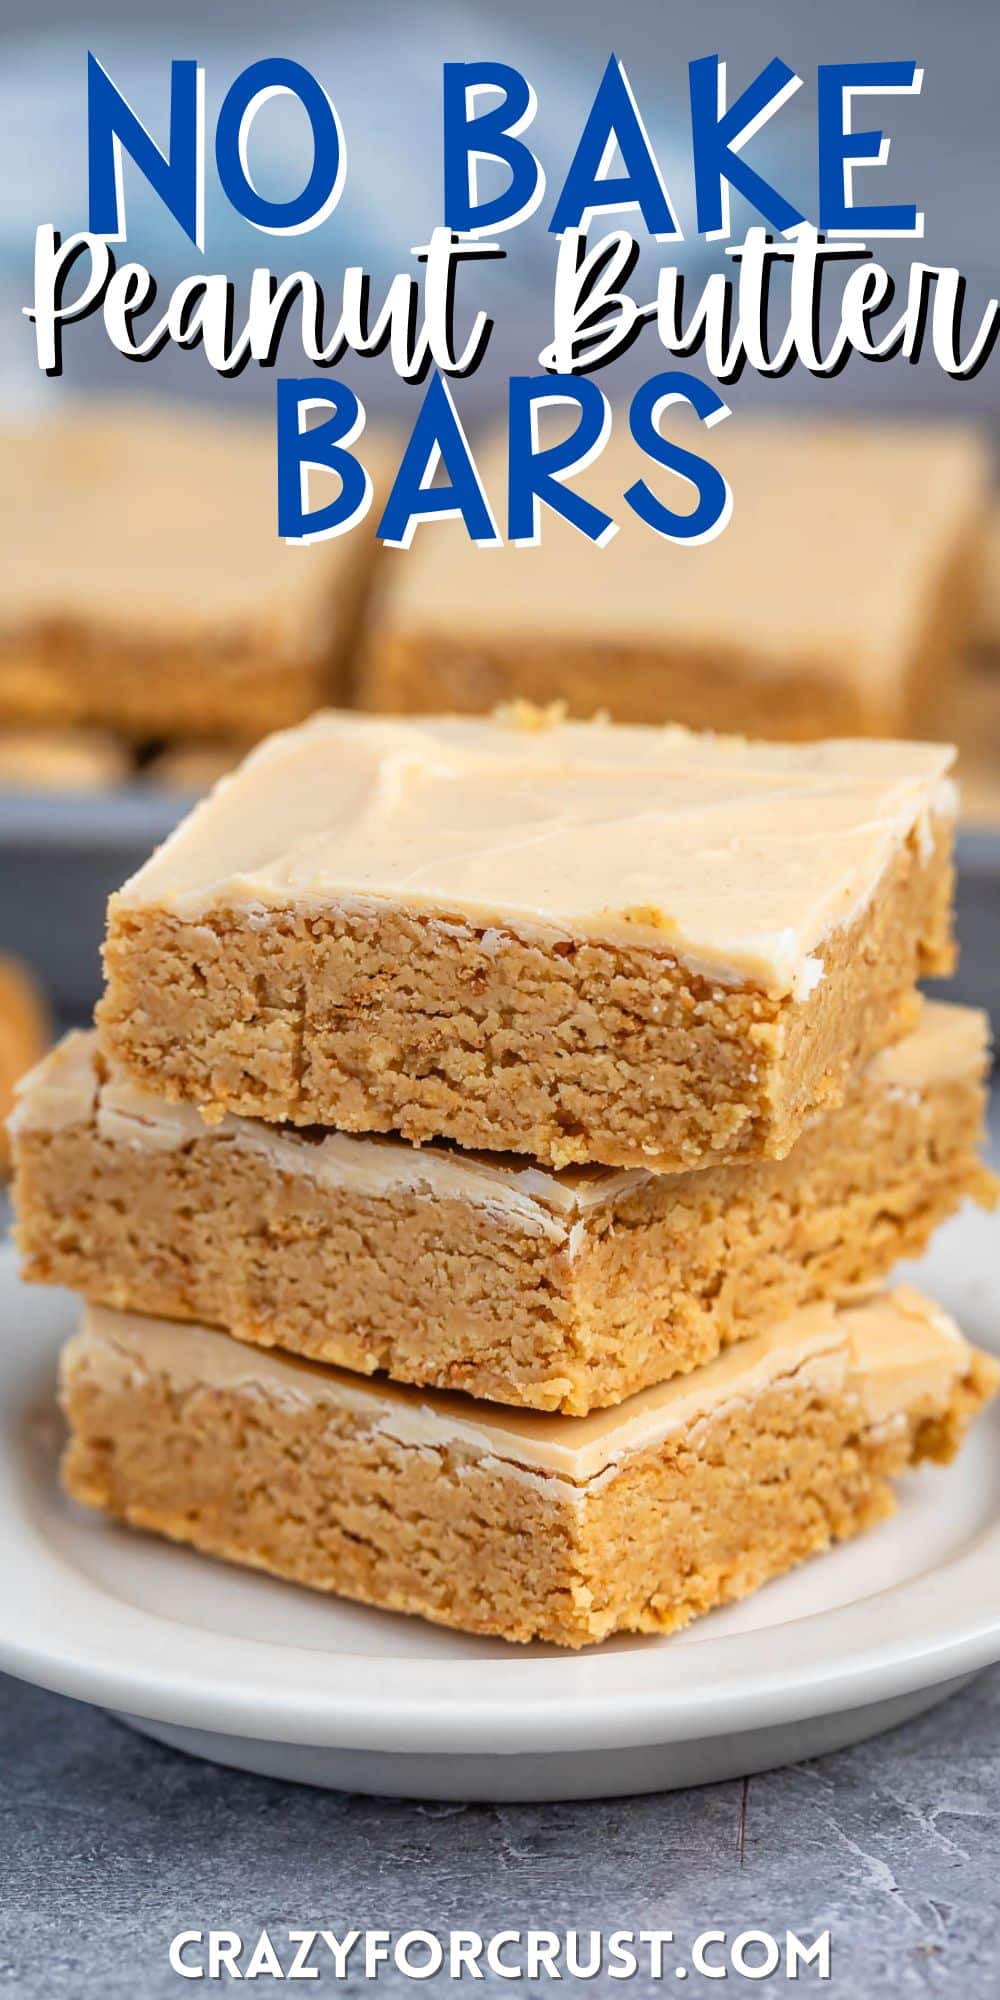 stacked peanut butter bars on a white plate with words on the image.